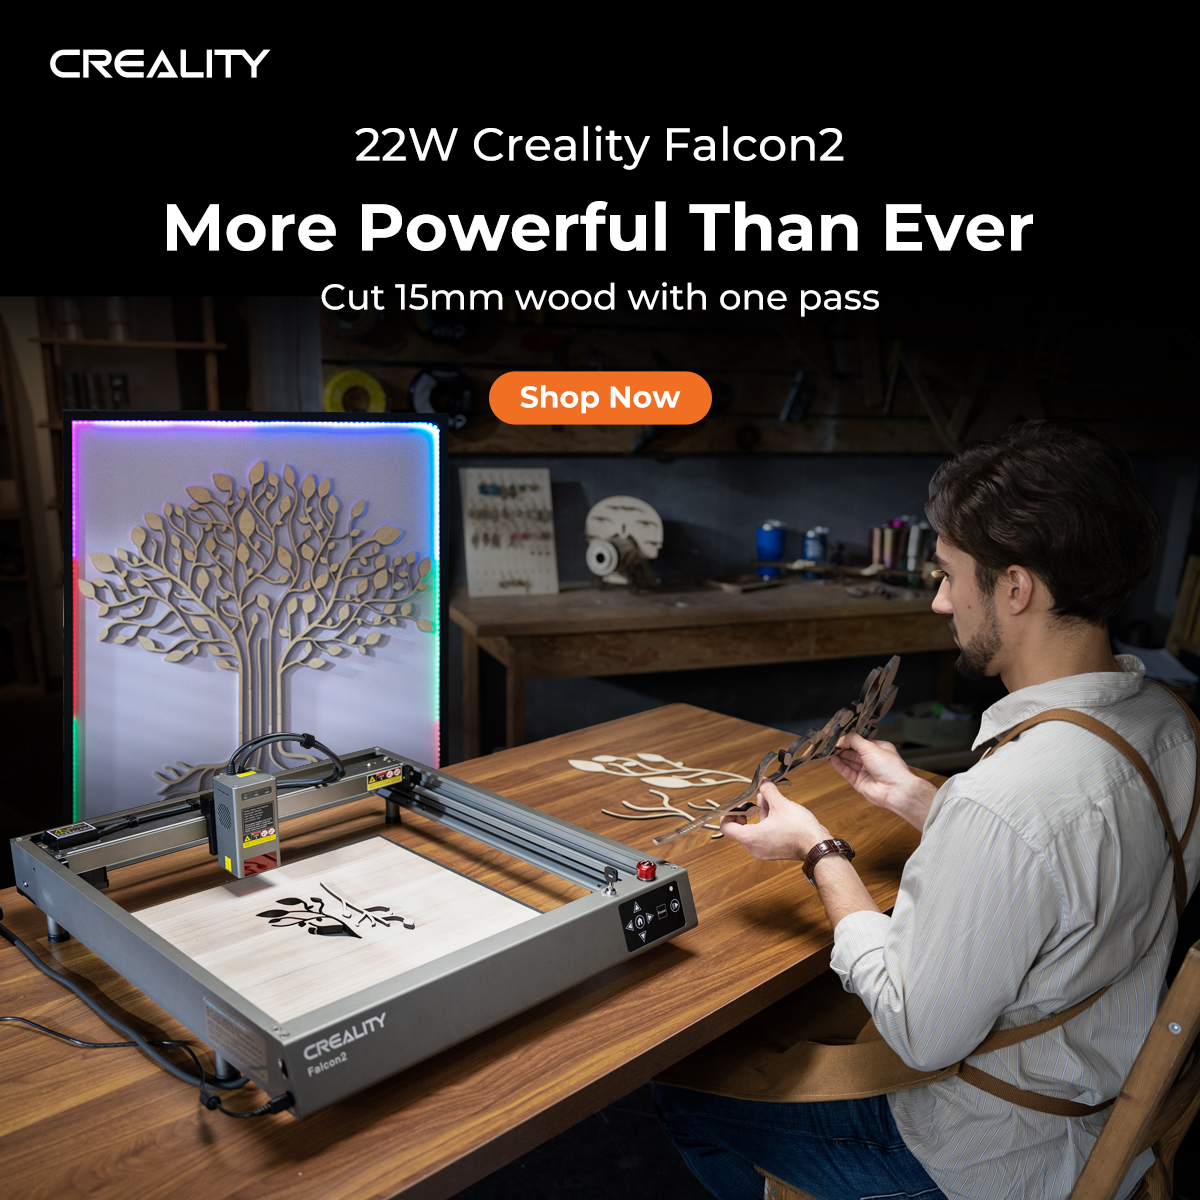 Free Course: 1st Look the New Creality Falcon 2 Laser Engraver! Setup  Tutorial Inside from Make With Tech (MakeWithTech)